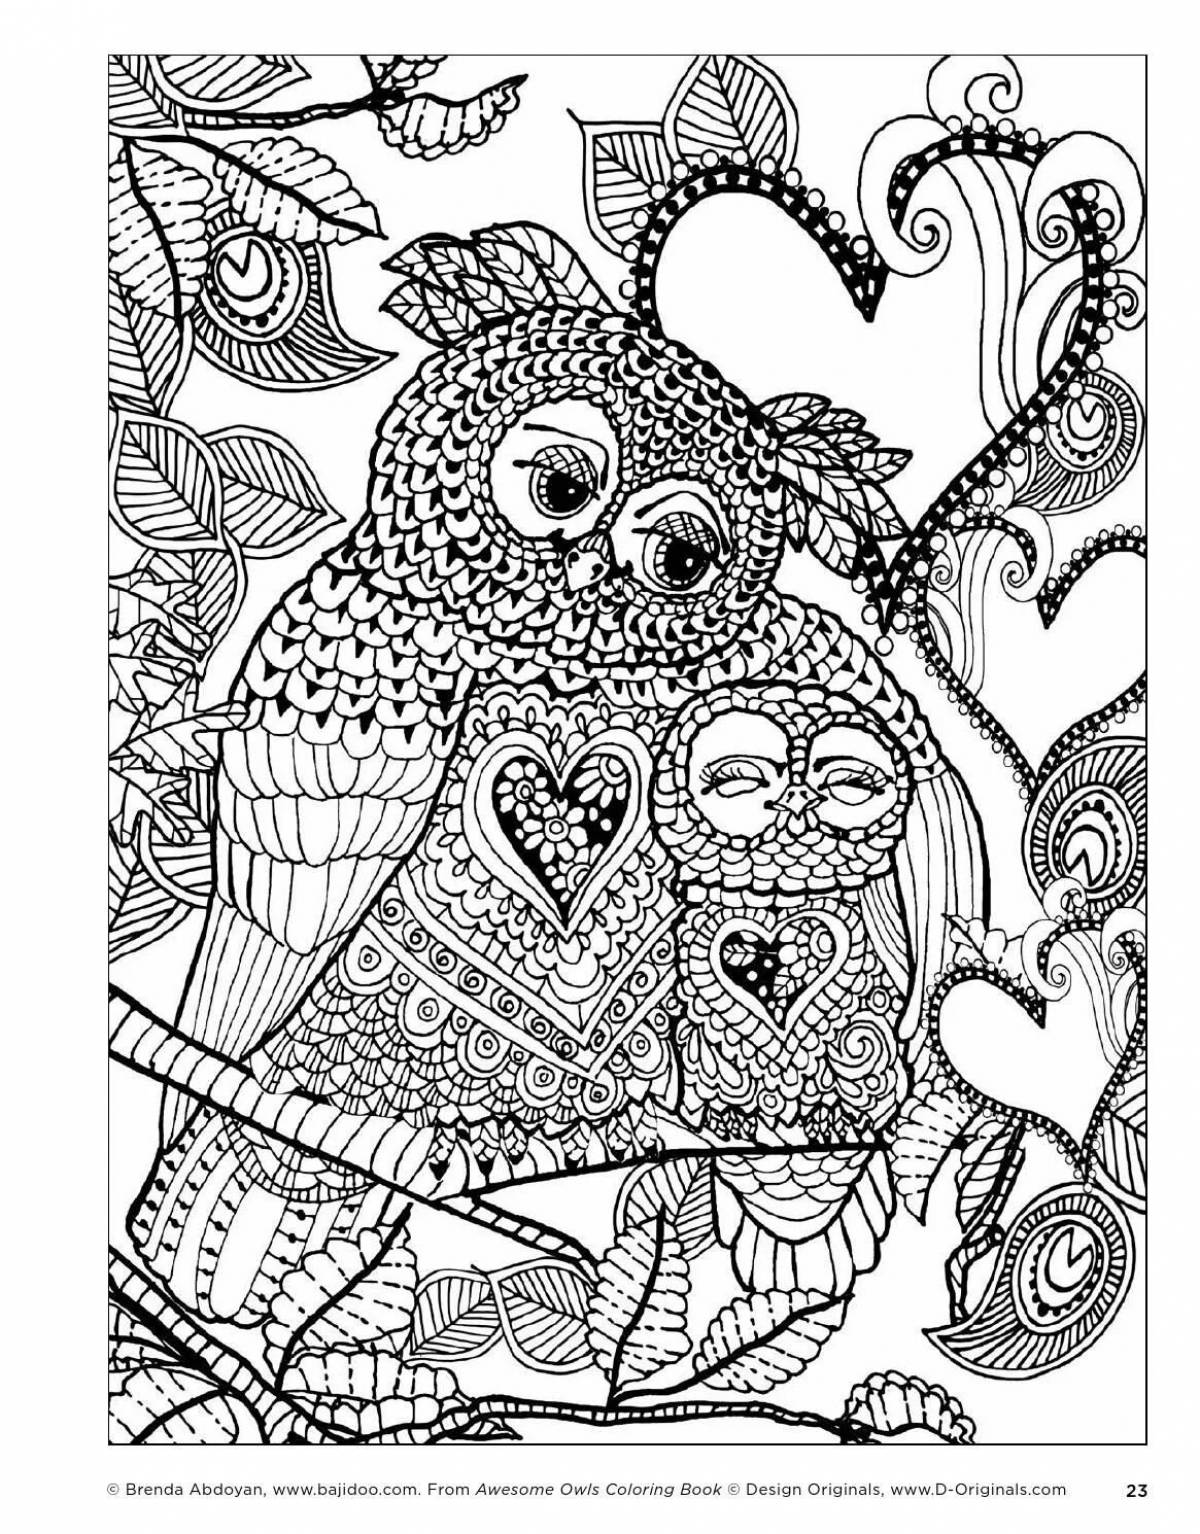 Coloring funny anti-stress owls